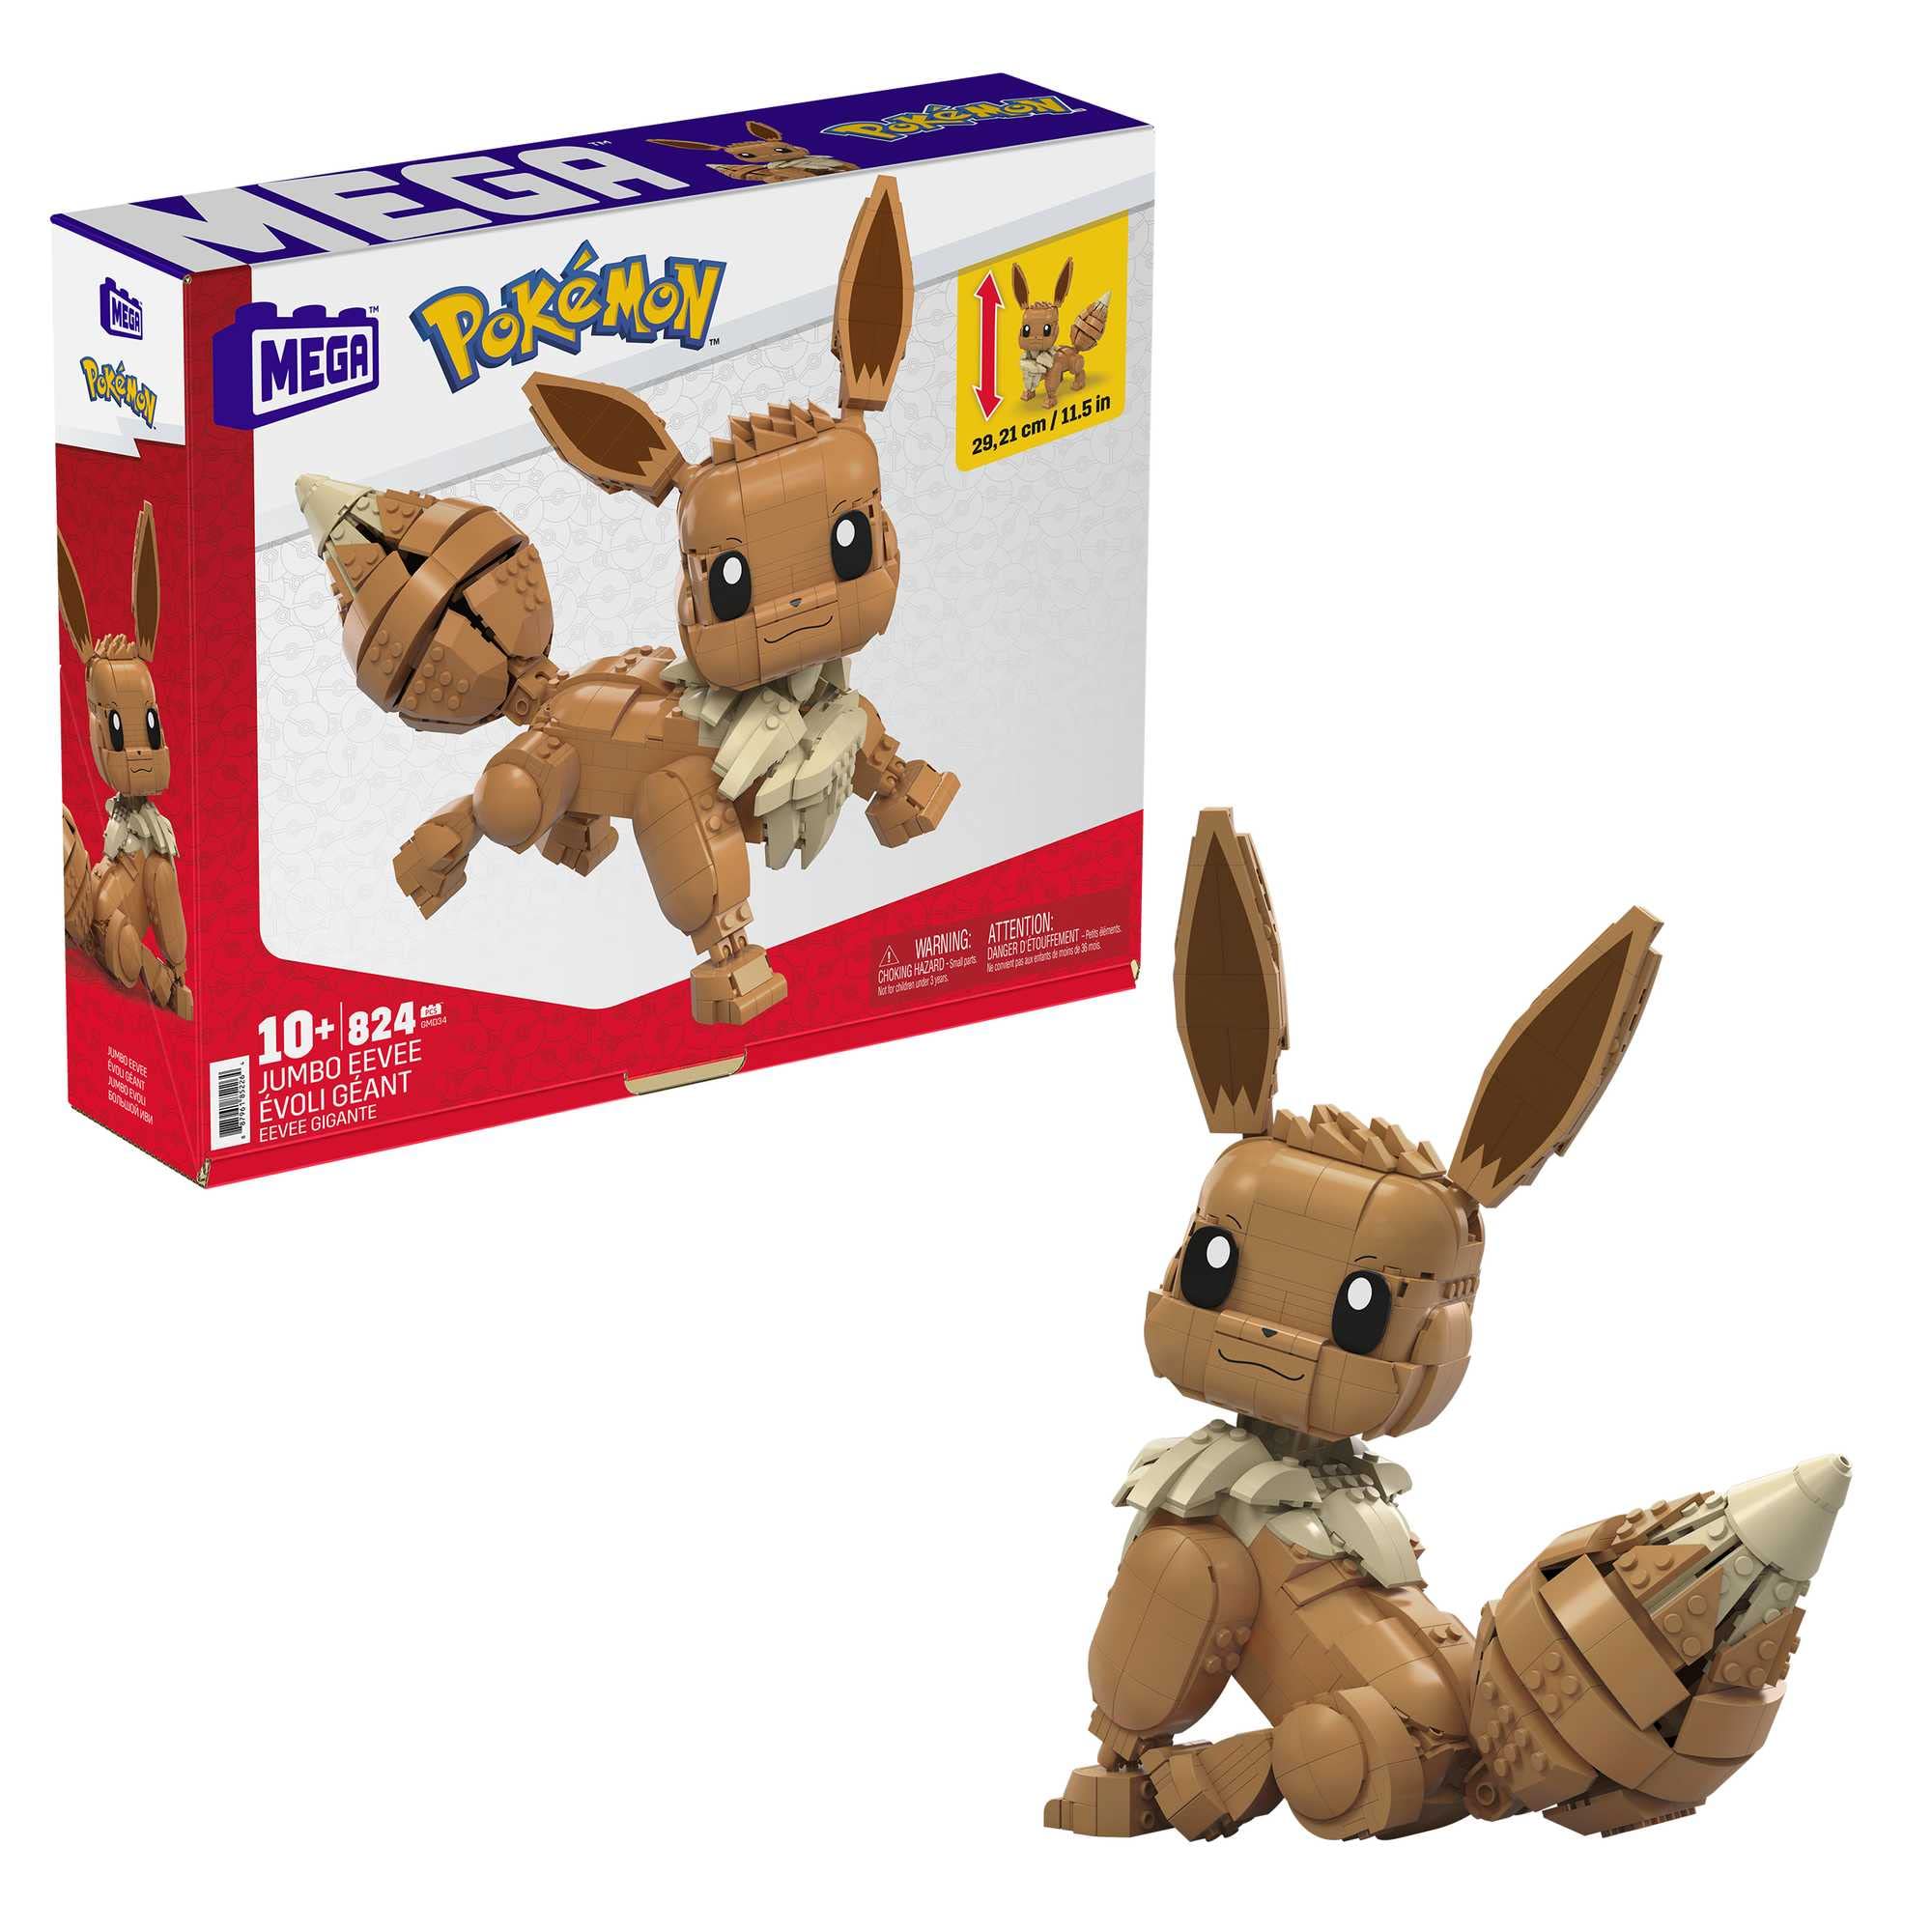 Mega Pokémon Jumbo Eevee Toy Building Set, 11 inches Tall, poseable, 824 Bricks and Pieces, for Boys and Girls, Ages 6 and up​